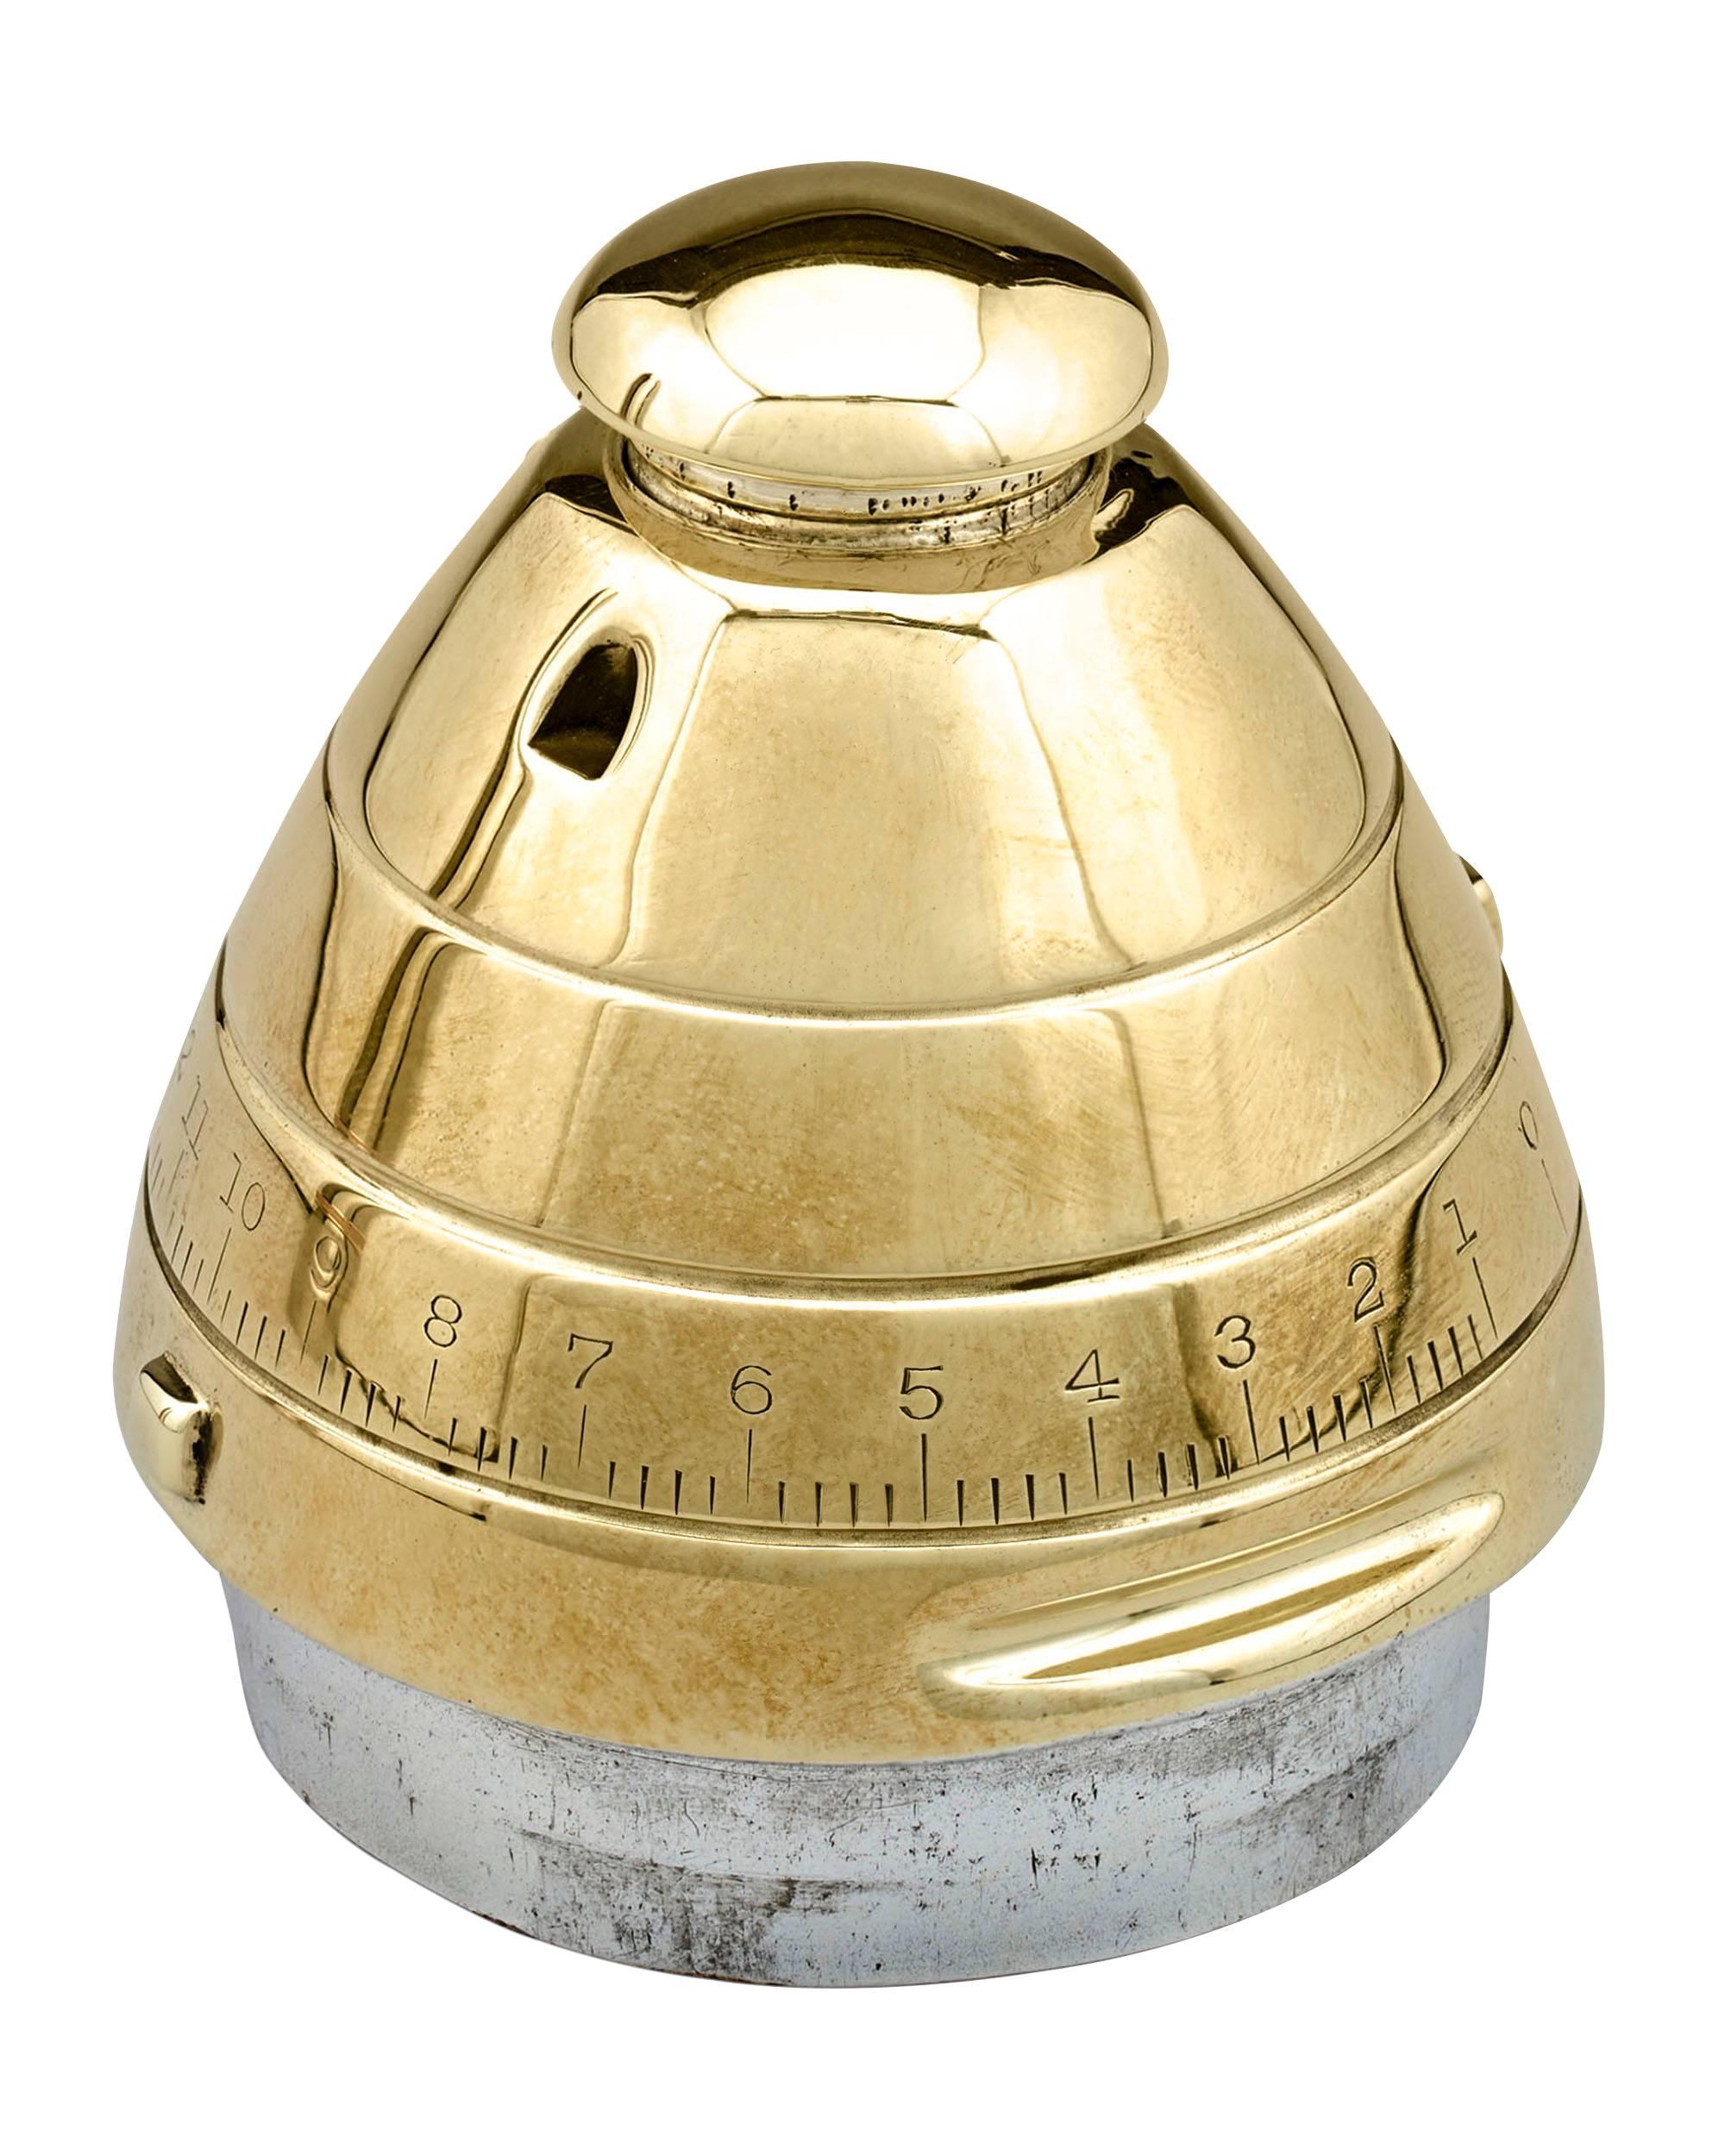 American Artillery Shell Cocktail Shaker by Gorham